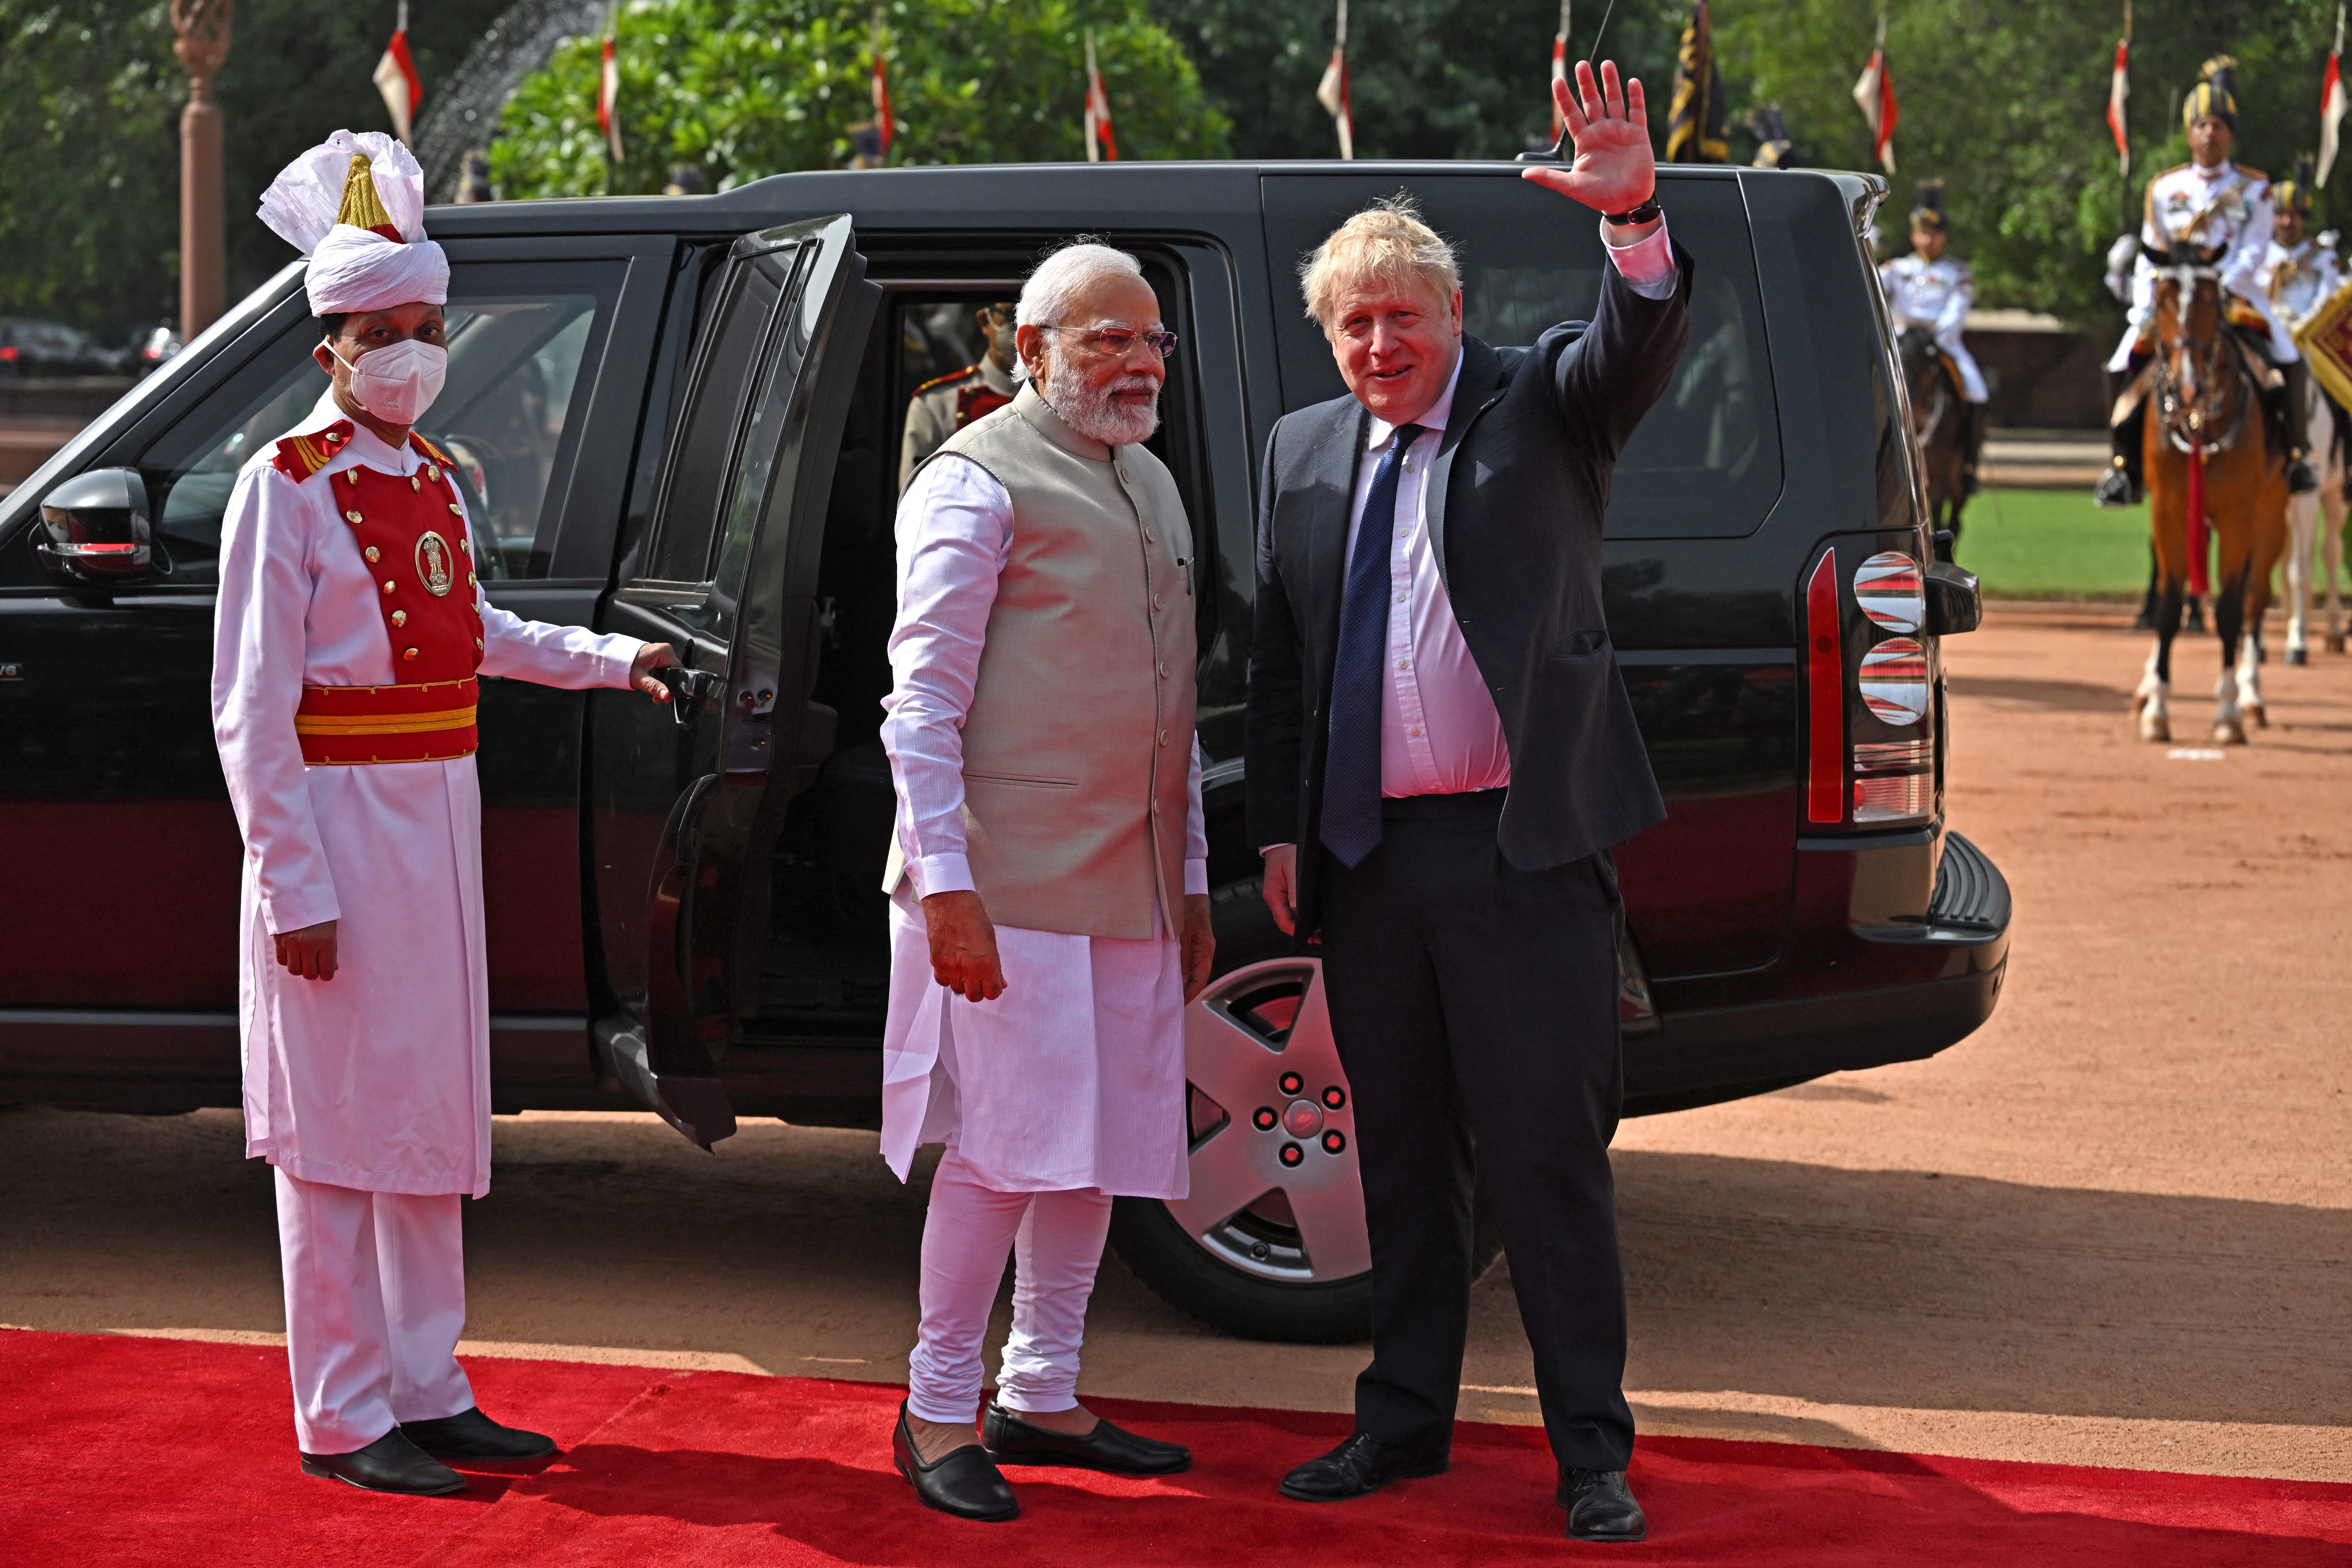 Britain’s Prime Minister Boris Johnson (R) waves as his Indian counterpart Narendra Modi watches after Johnson’s ceremonial reception at India’s presidential palace Rashtrapati Bhavan in New Delhi on April 22, 2022